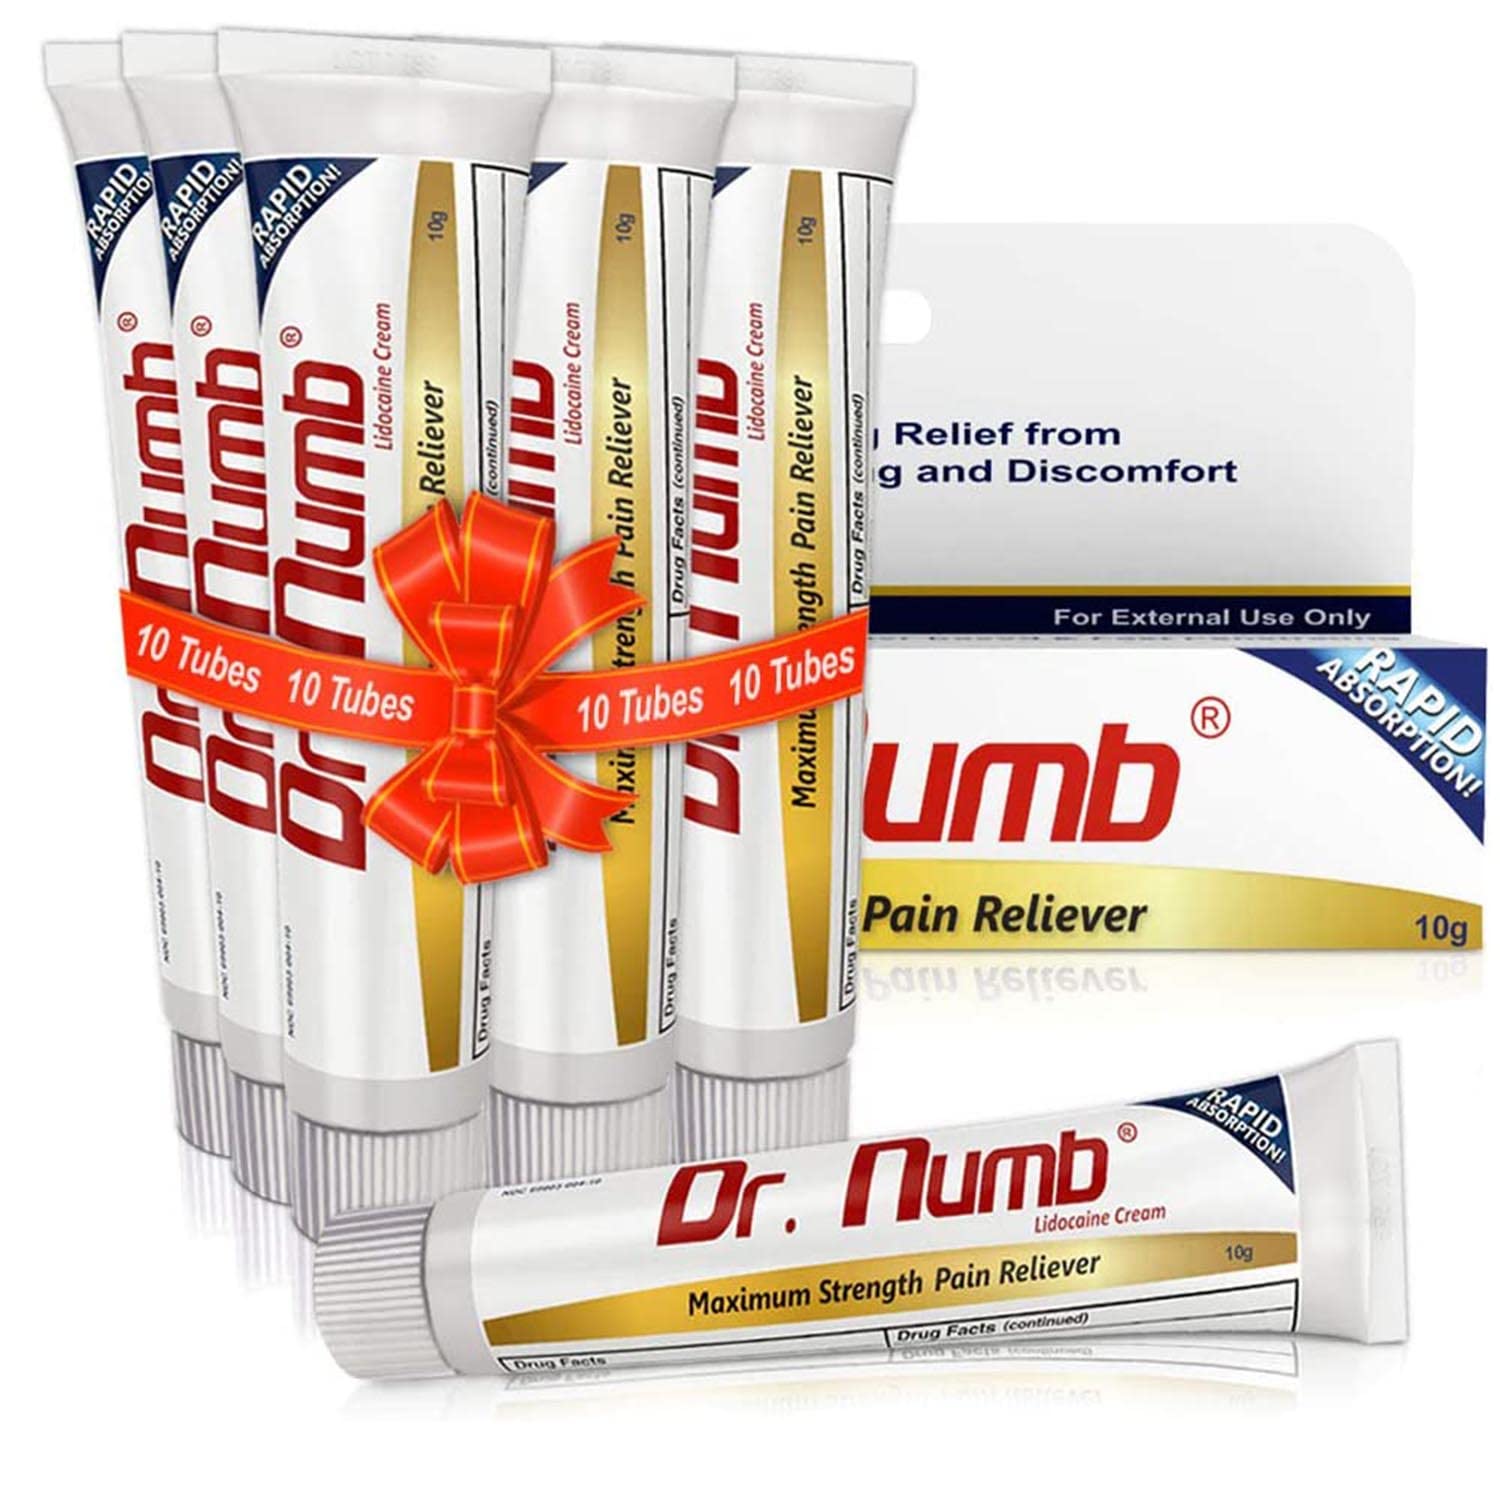 Dr. Numb 5% Lidocaine Cream - Maximum Strength Pain Reliever With Vitamin E - Prompt Soothing Relief From Painful Burning, Itchi